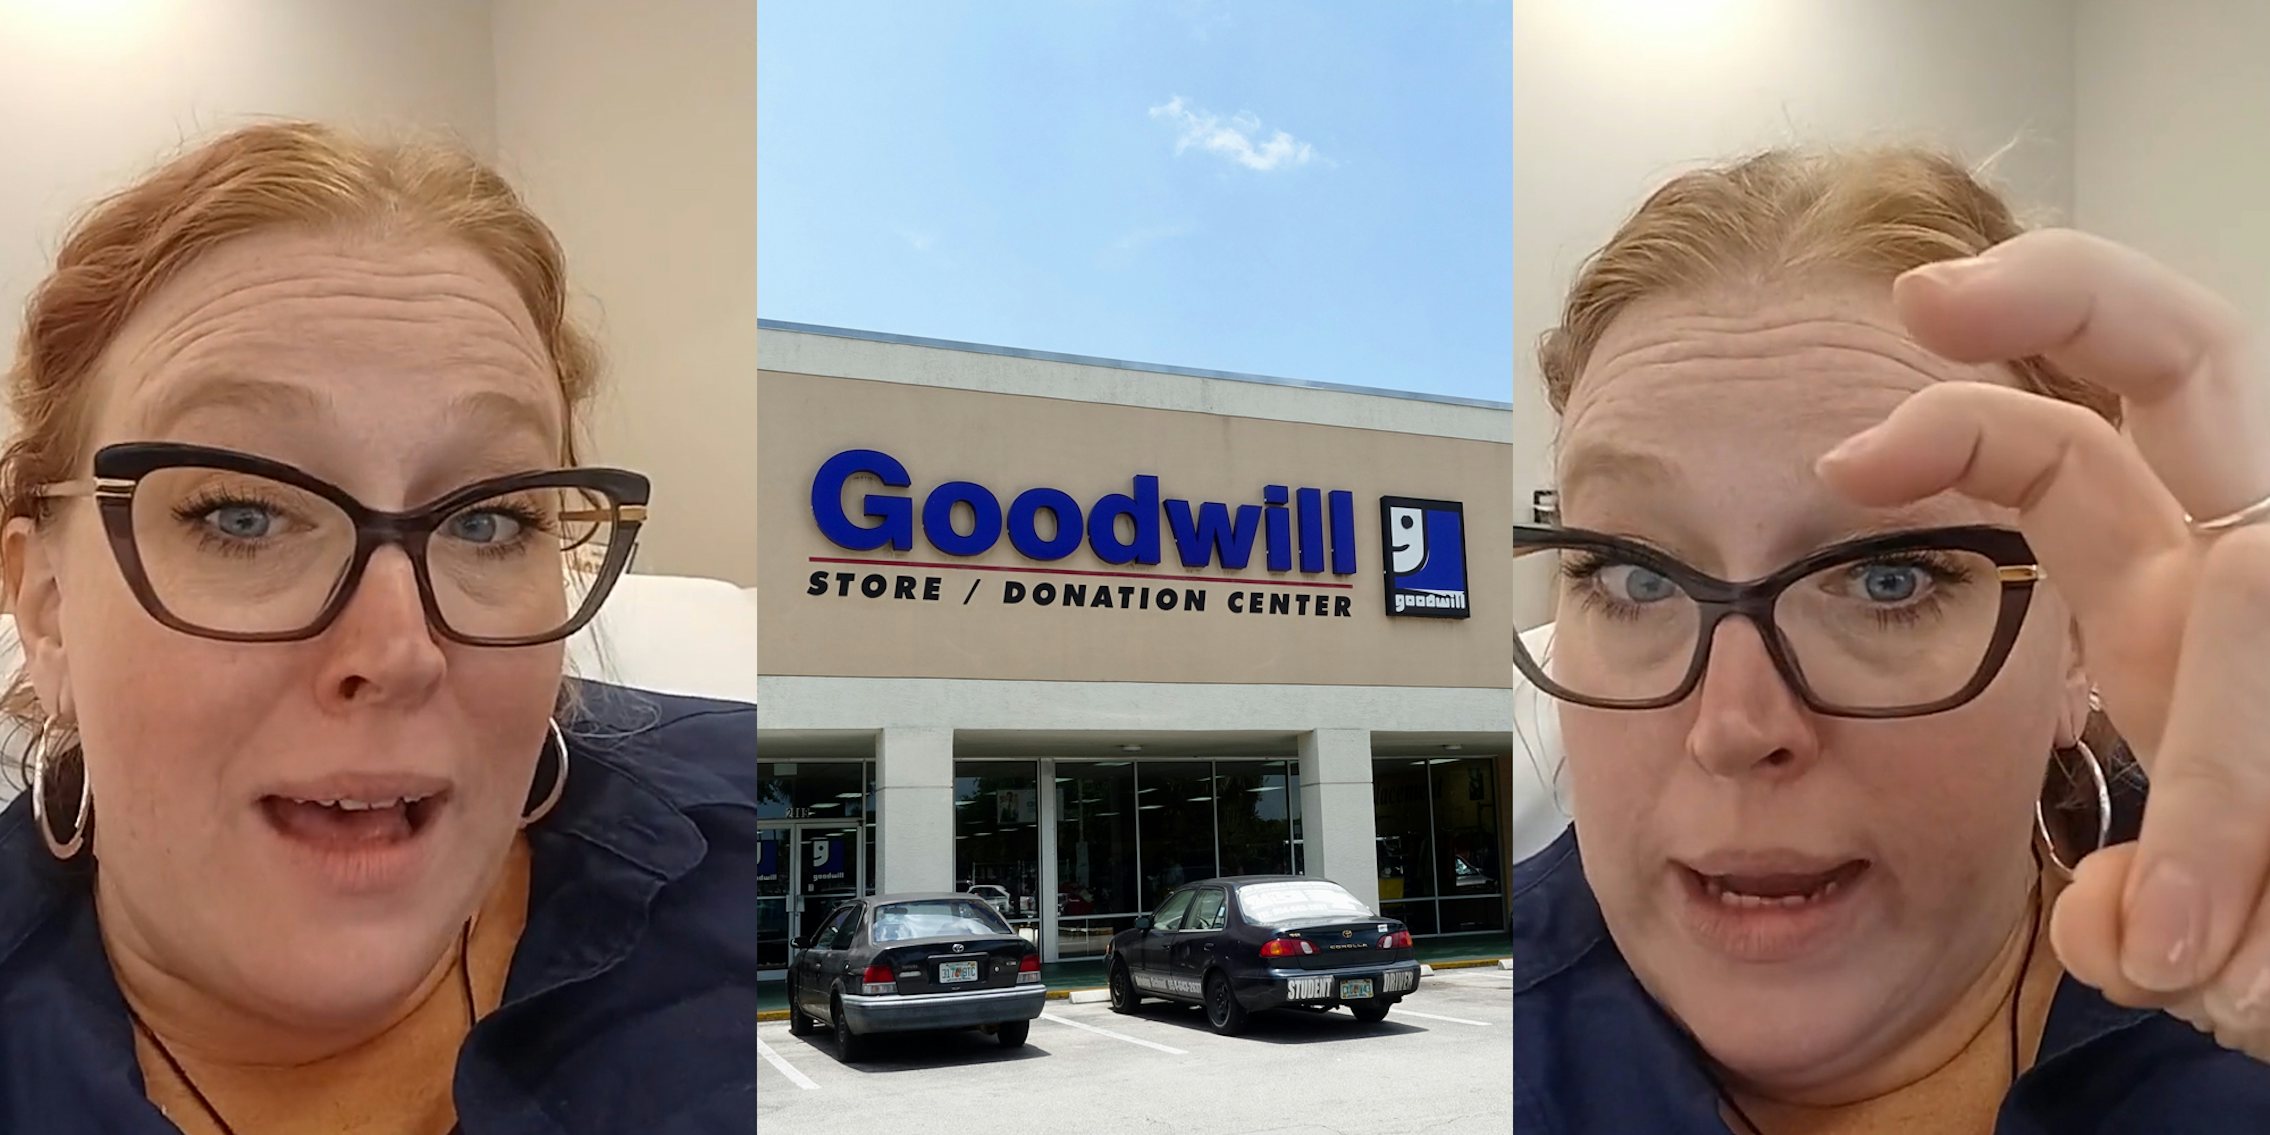 woman speaking in front of tan wall (l) Goodwill store building with sign (c) woman speaking in front of tan wall holding up fingers in air quote position (r)